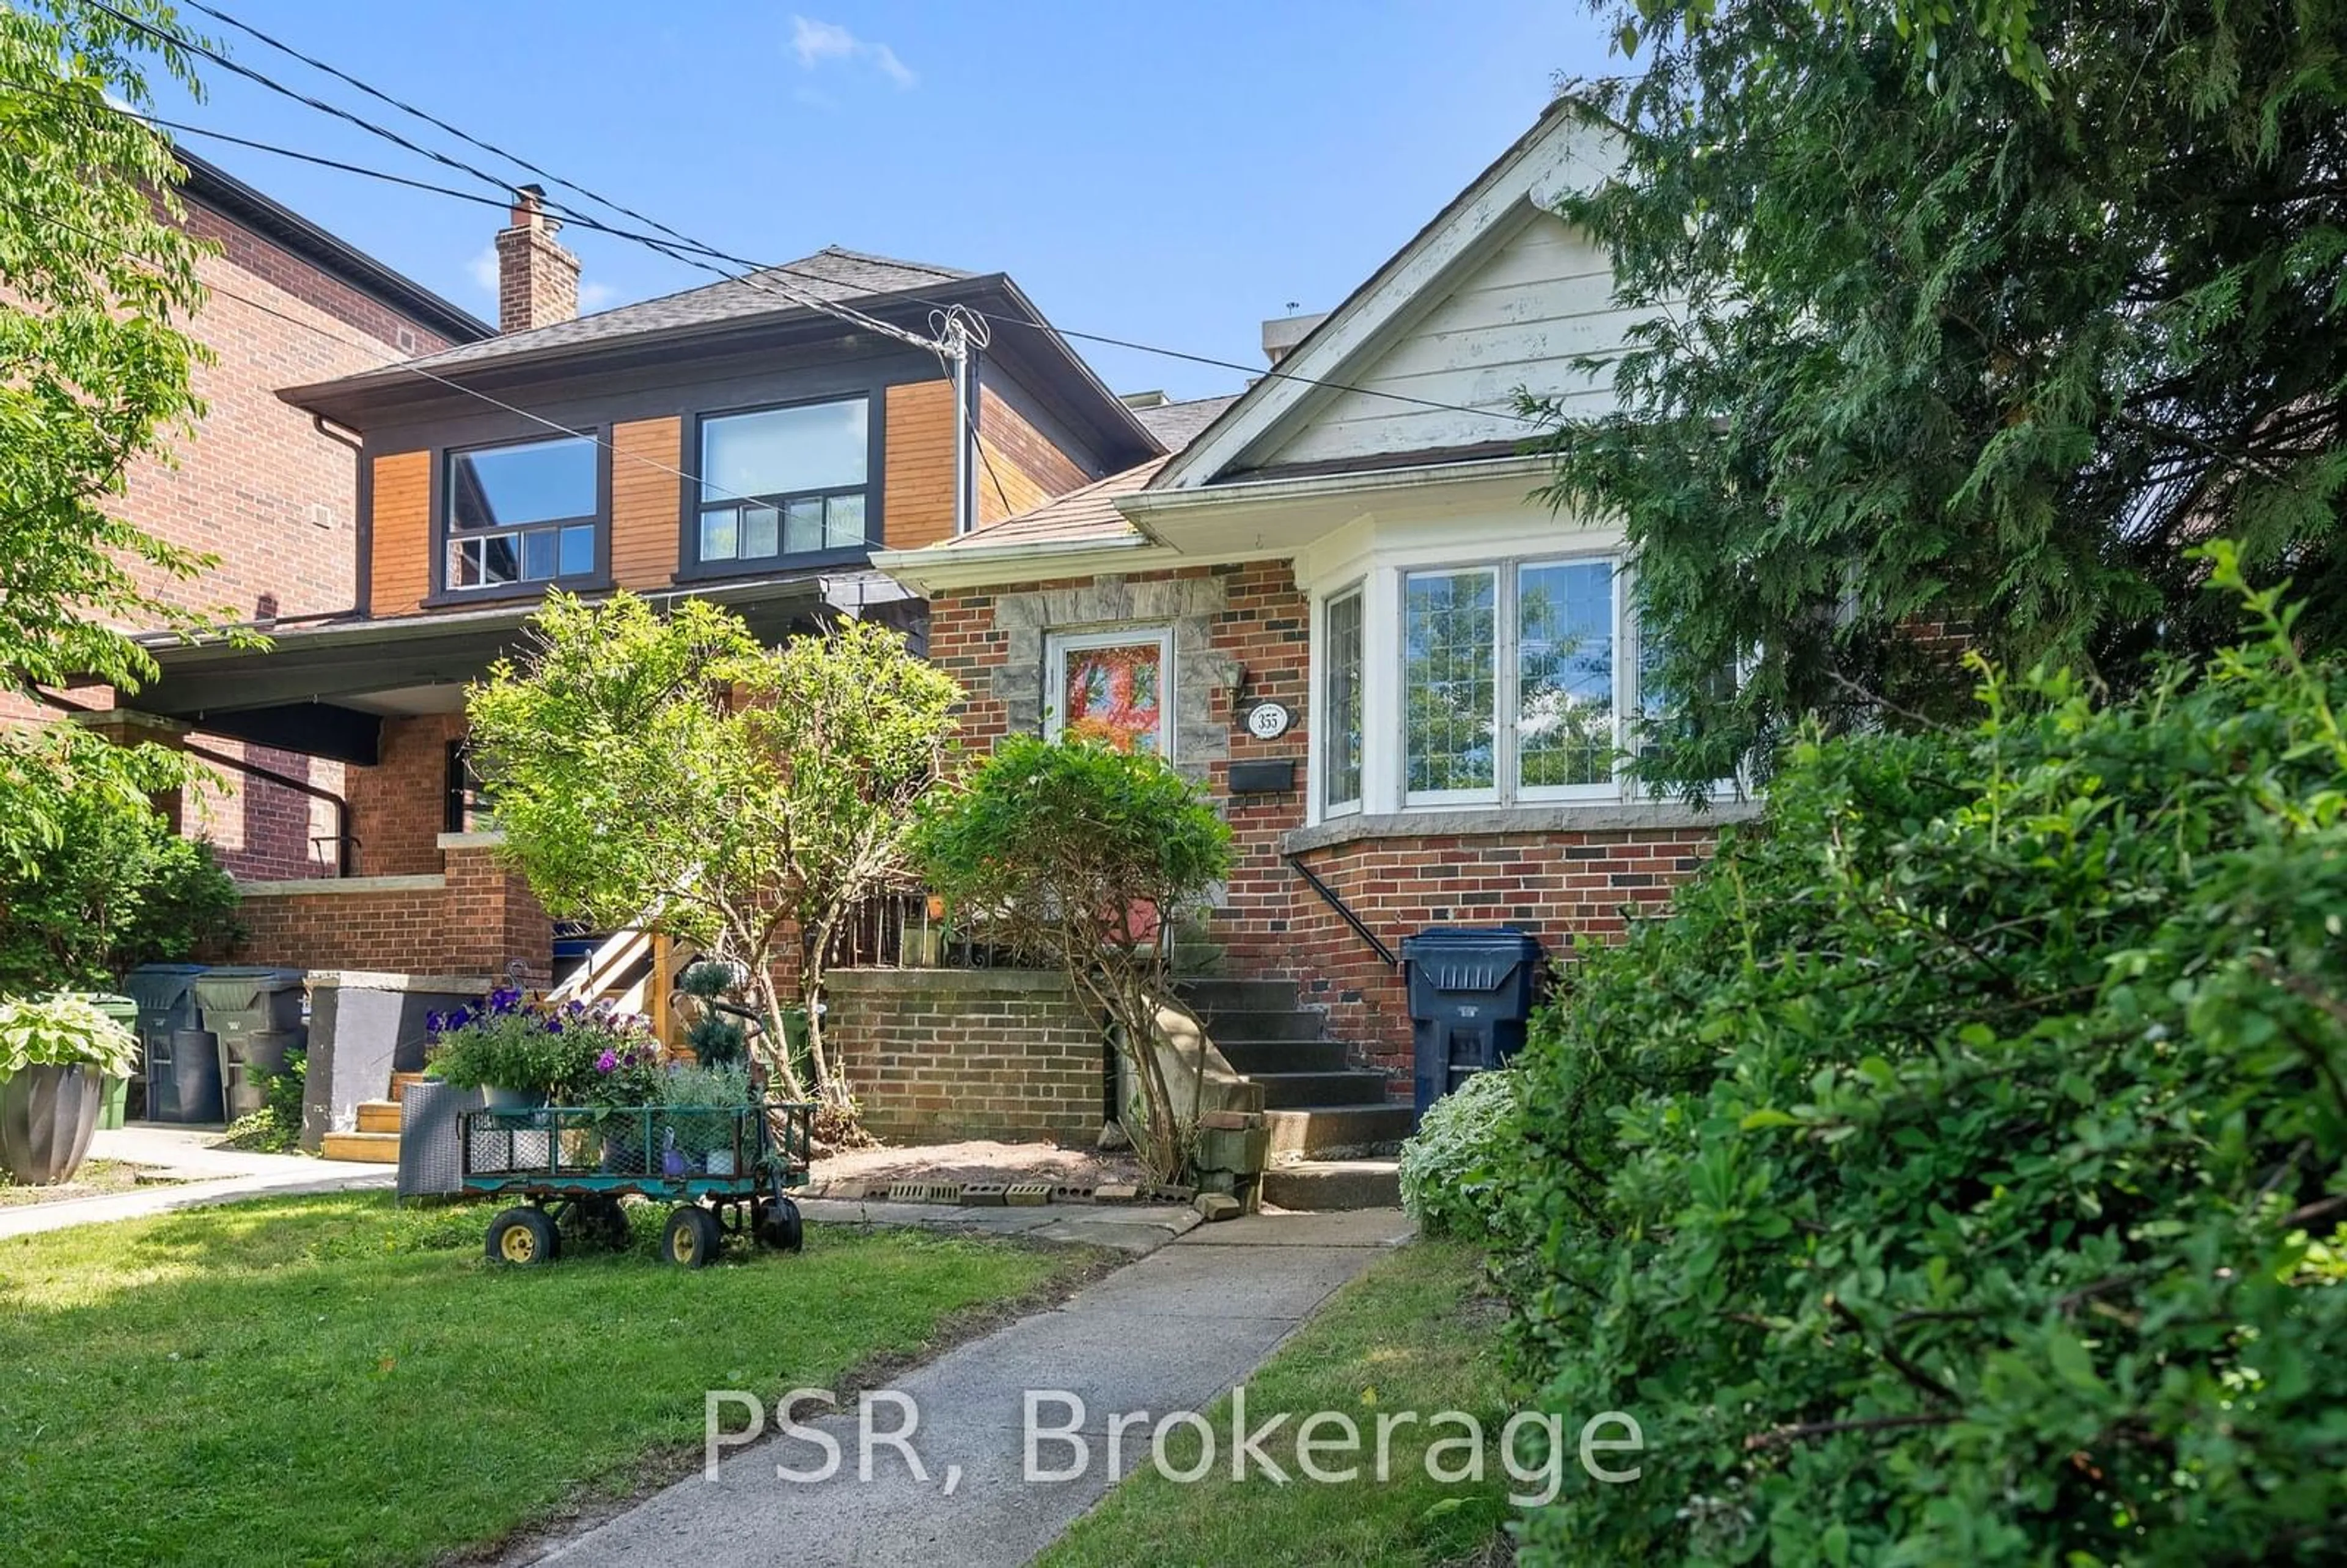 Frontside or backside of a home for 355 Roehampton Ave, Toronto Ontario M4P 1S3